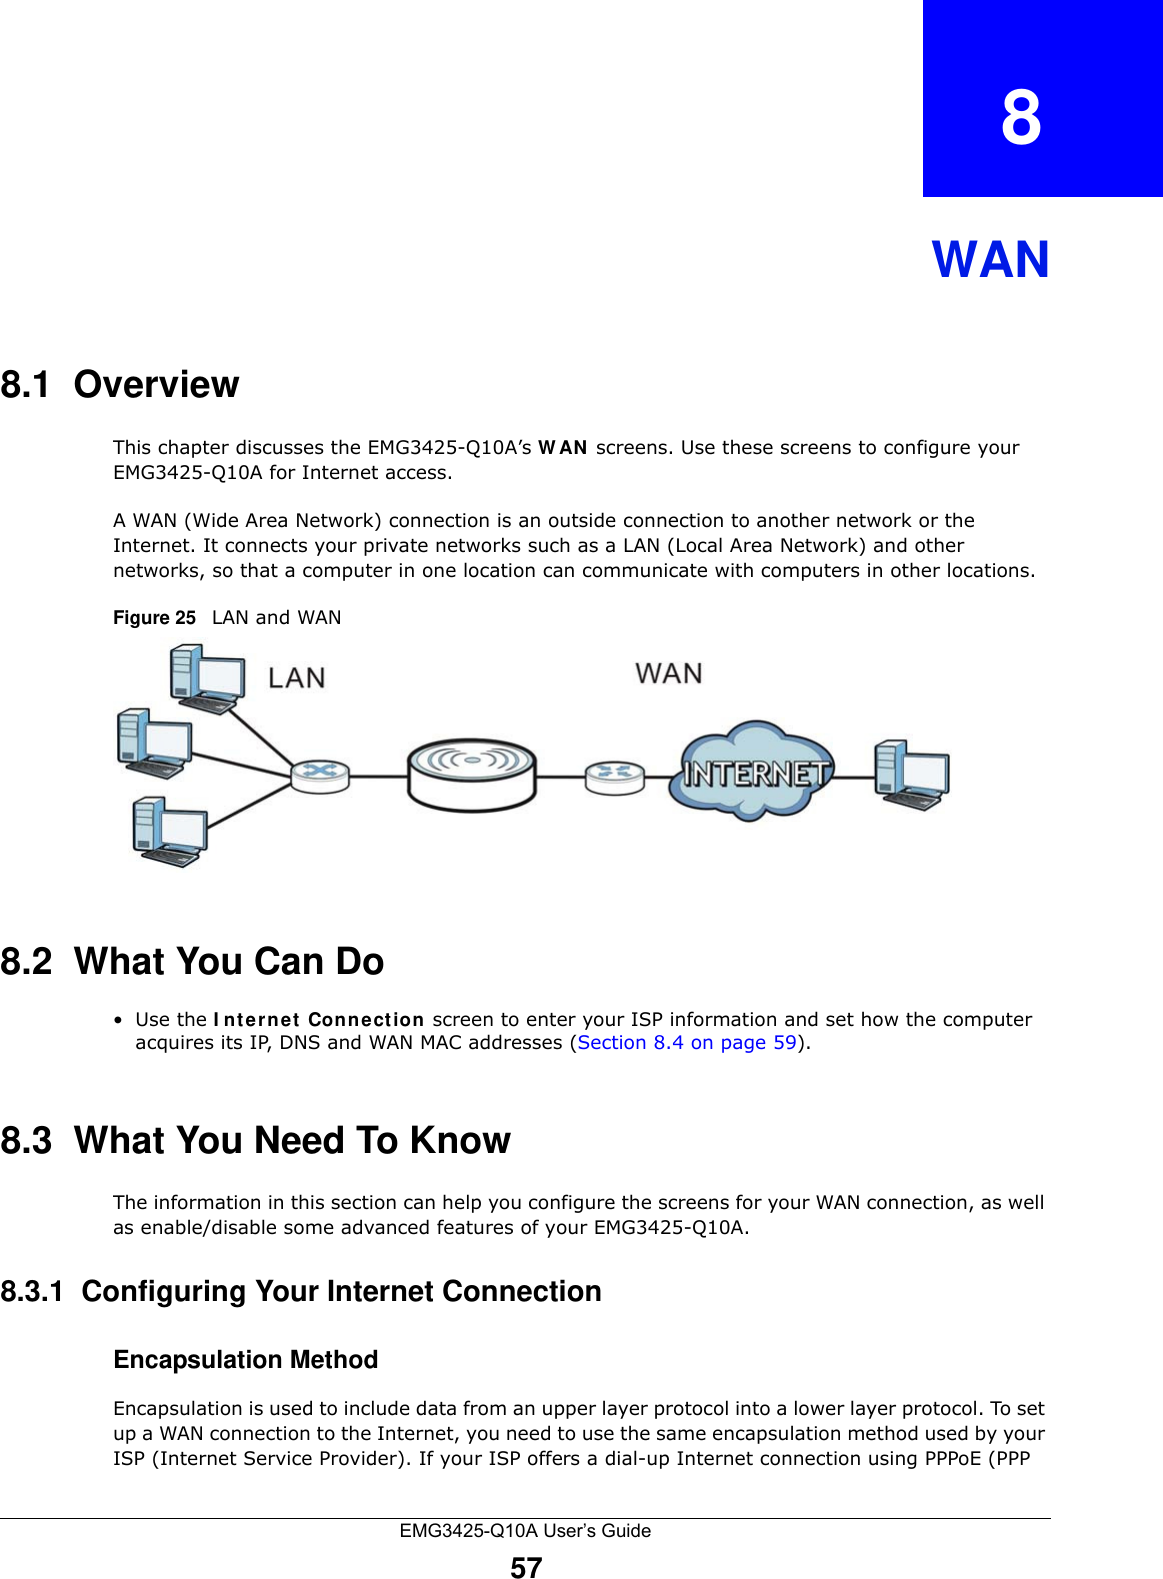 EMG3425-Q10A User’s Guide57CHAPTER   8WAN8.1  OverviewThis chapter discusses the EMG3425-Q10A’s W AN  screens. Use these screens to configure your EMG3425-Q10A for Internet access.A WAN (Wide Area Network) connection is an outside connection to another network or the Internet. It connects your private networks such as a LAN (Local Area Network) and other networks, so that a computer in one location can communicate with computers in other locations.Figure 25   LAN and WAN8.2  What You Can Do•Use the I nt er n e t  Connection screen to enter your ISP information and set how the computer acquires its IP, DNS and WAN MAC addresses (Section 8.4 on page 59).8.3  What You Need To KnowThe information in this section can help you configure the screens for your WAN connection, as well as enable/disable some advanced features of your EMG3425-Q10A.8.3.1  Configuring Your Internet ConnectionEncapsulation MethodEncapsulation is used to include data from an upper layer protocol into a lower layer protocol. To set up a WAN connection to the Internet, you need to use the same encapsulation method used by your ISP (Internet Service Provider). If your ISP offers a dial-up Internet connection using PPPoE (PPP 